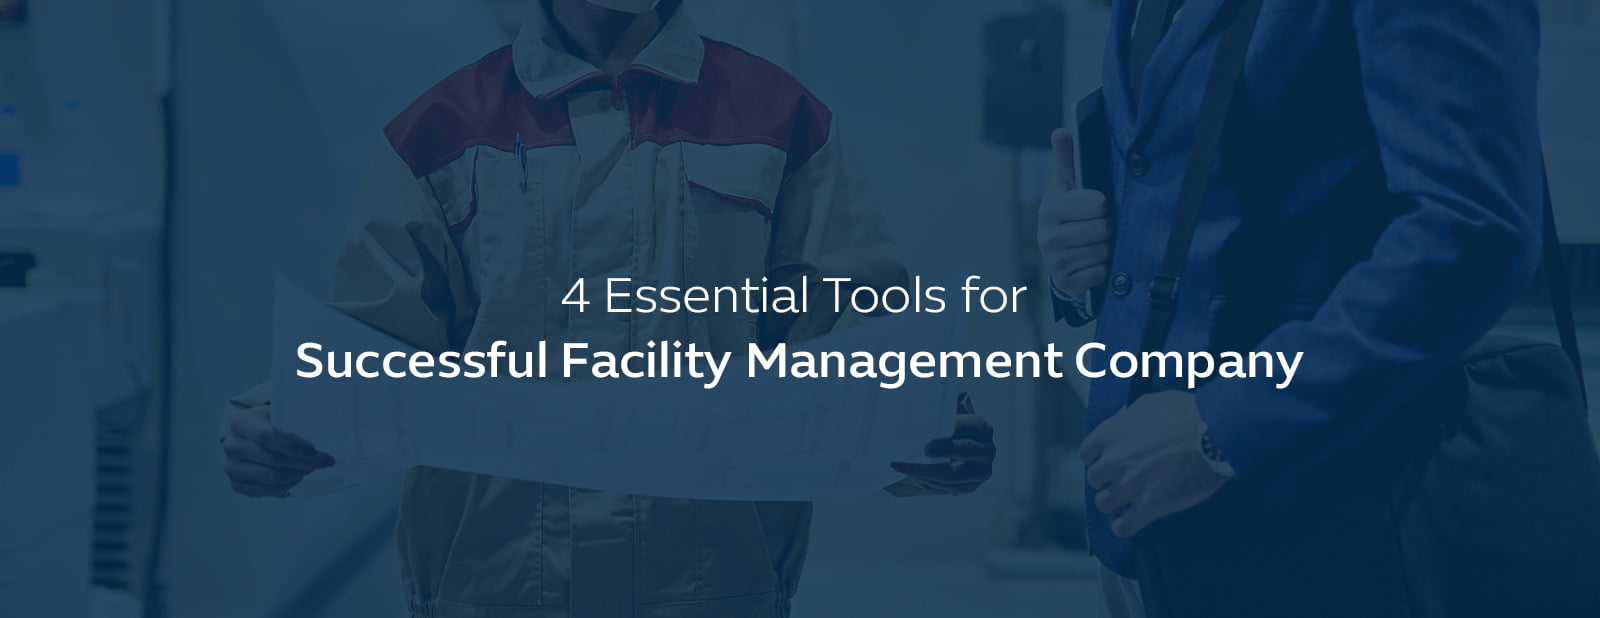 4 Essential Tools For Successful Facility Management Company